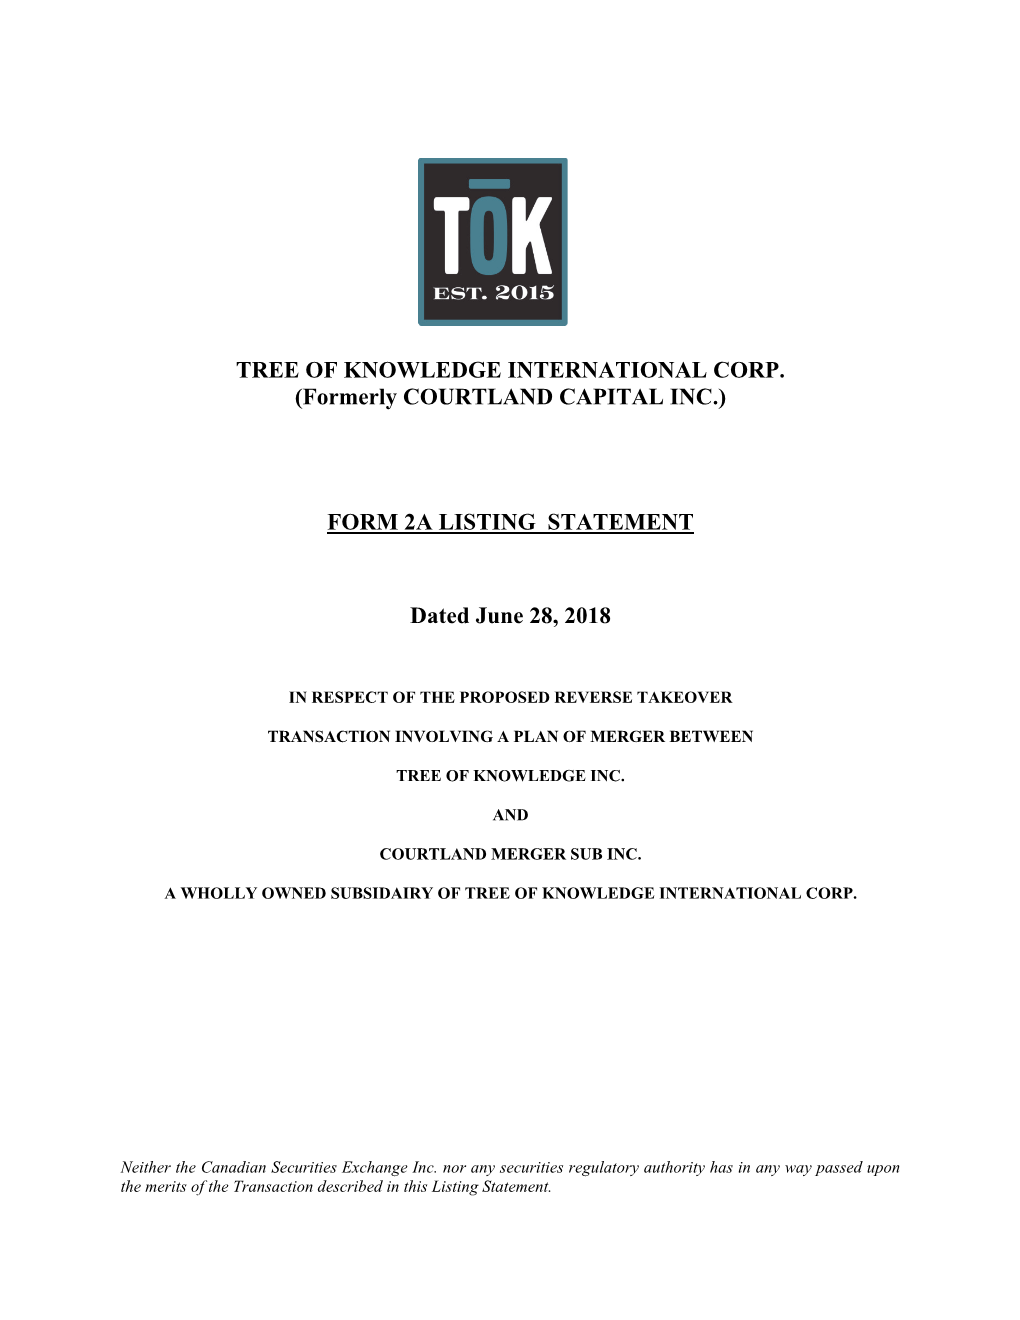 TREE of KNOWLEDGE INTERNATIONAL CORP. (Formerly COURTLAND CAPITAL INC.)